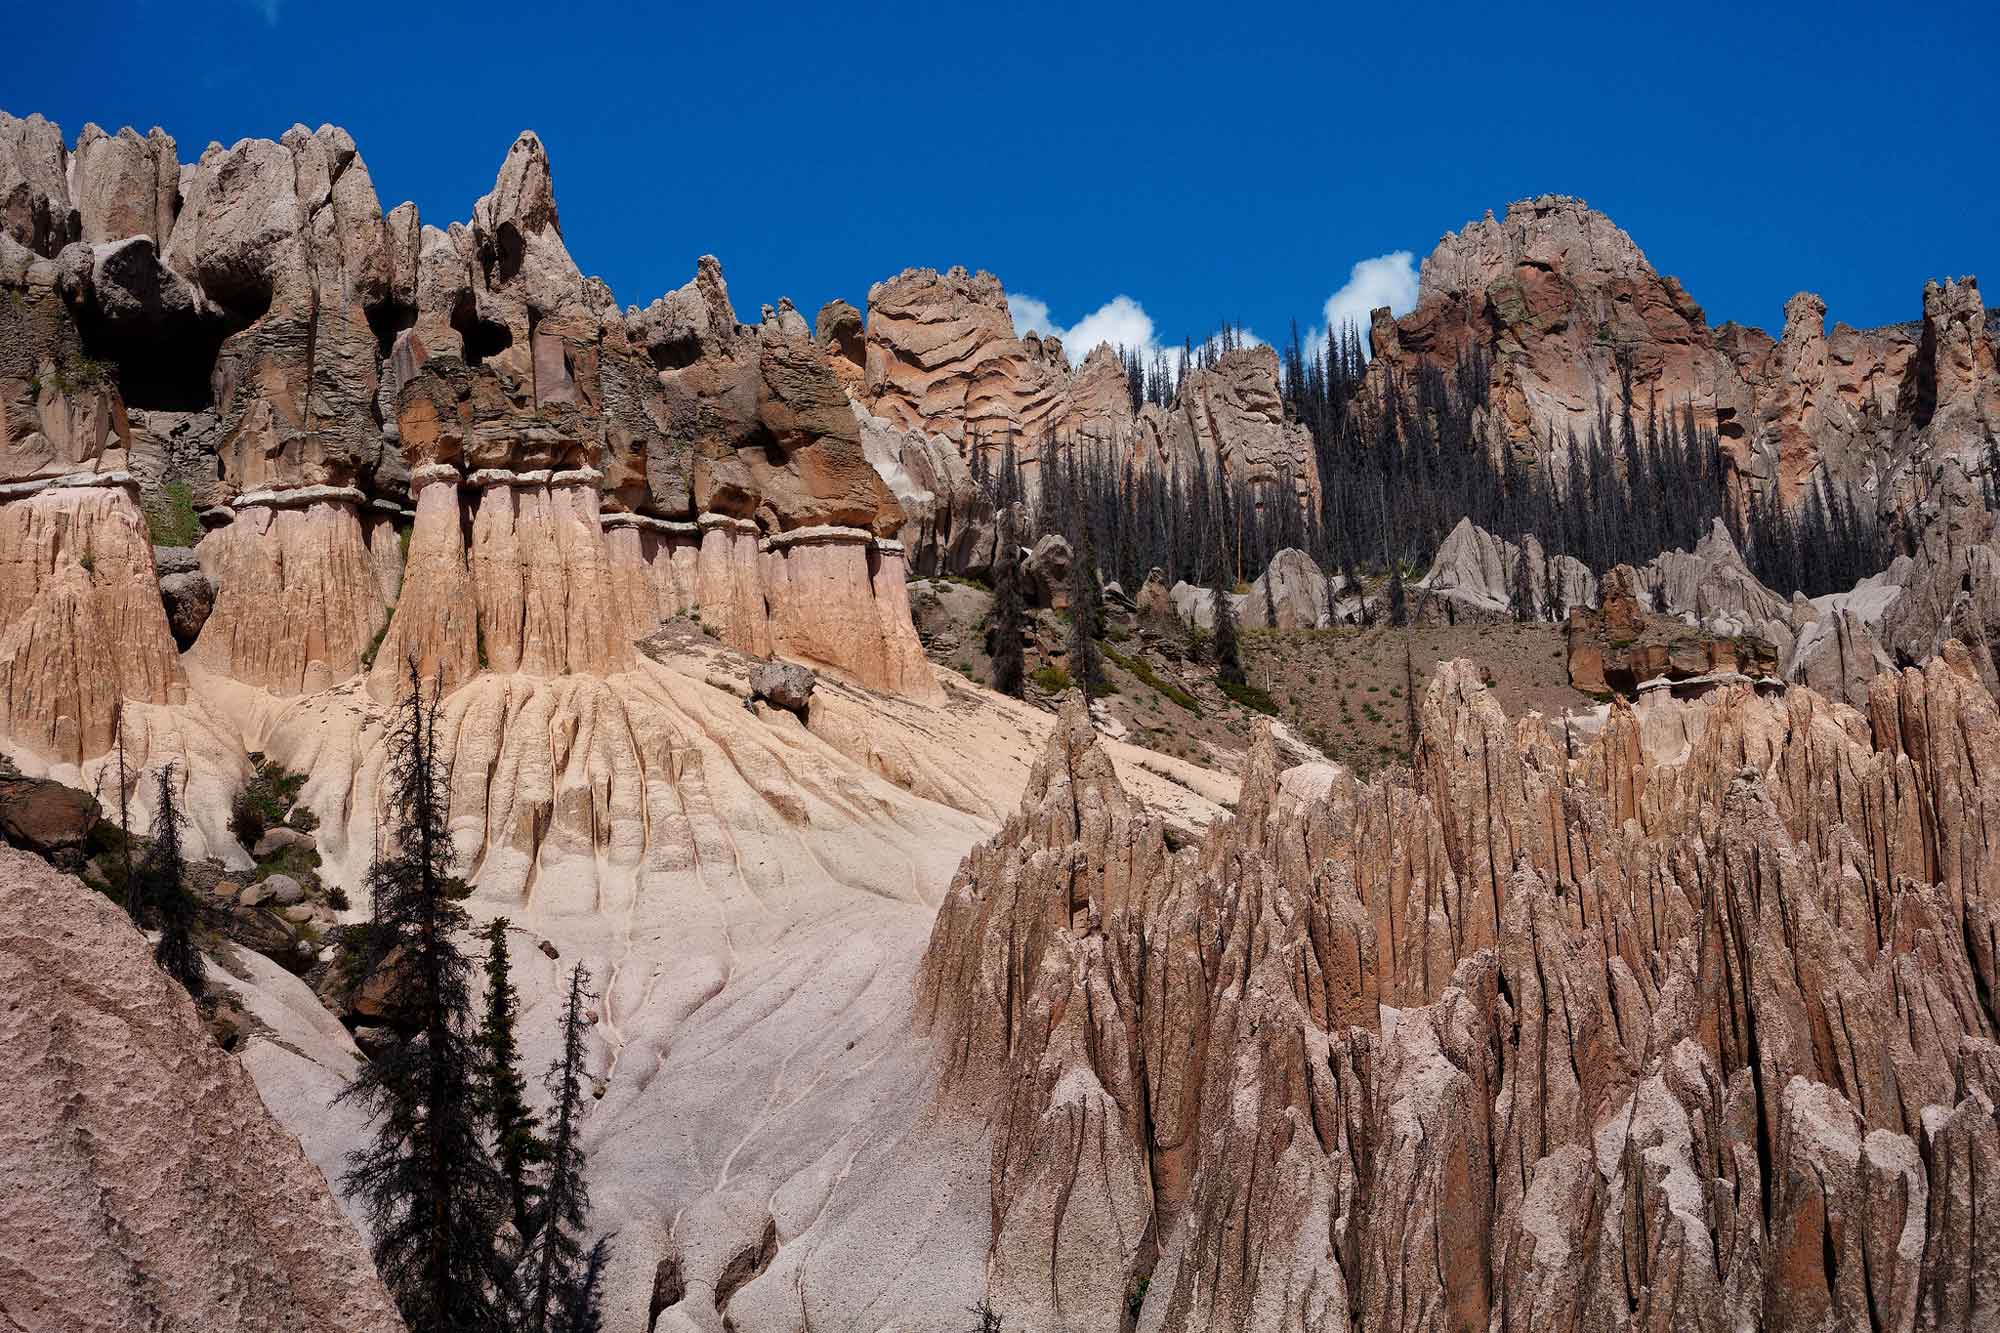 Photograph of eroded ash deposits at the Wheeler Geologic Area in Colorado.